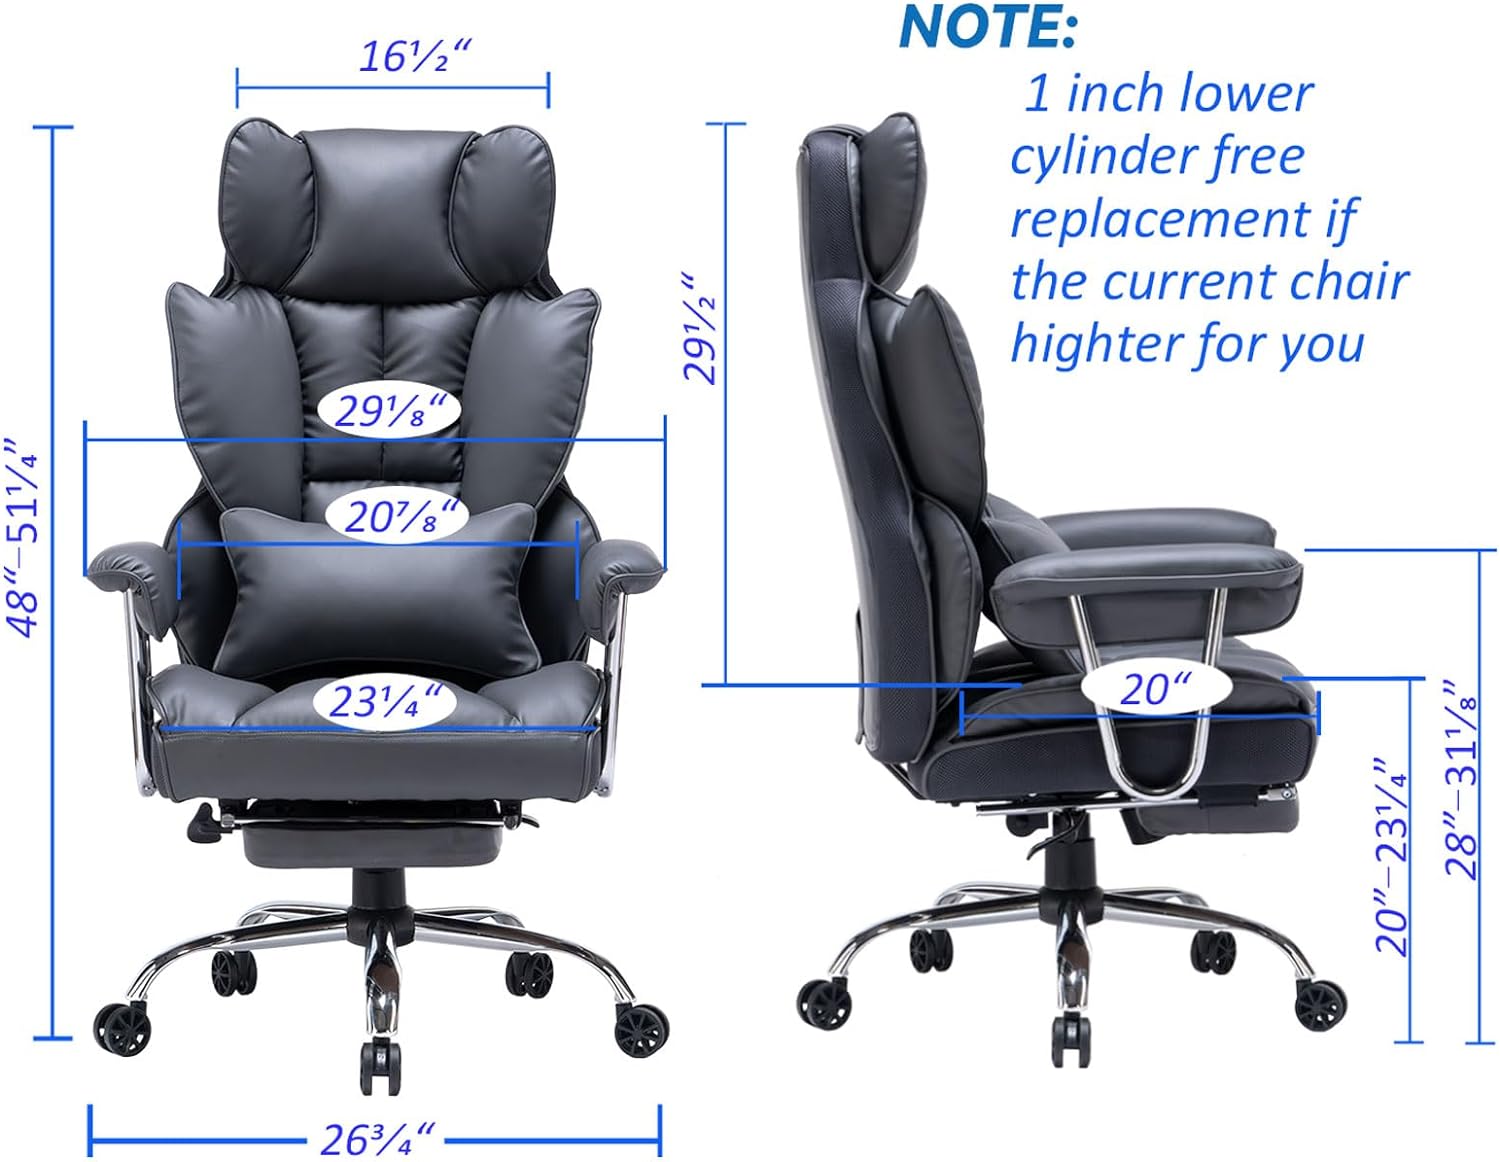 After a long search, I finally found the perfect chair for my needs. Assembly was a breeze, taking less than 20 minutes. The chair' top-notch build quality offers a sturdy and durable feel.The PU leather is luxurious and comfortable for long work hours, and the adjustable lumbar support and leg rest are lifesavers for my back pain. The chair' adjustability features cater to every need, and its wide seat and high back perfectly support my tall frame.In terms of looks, its dark grey color adds a